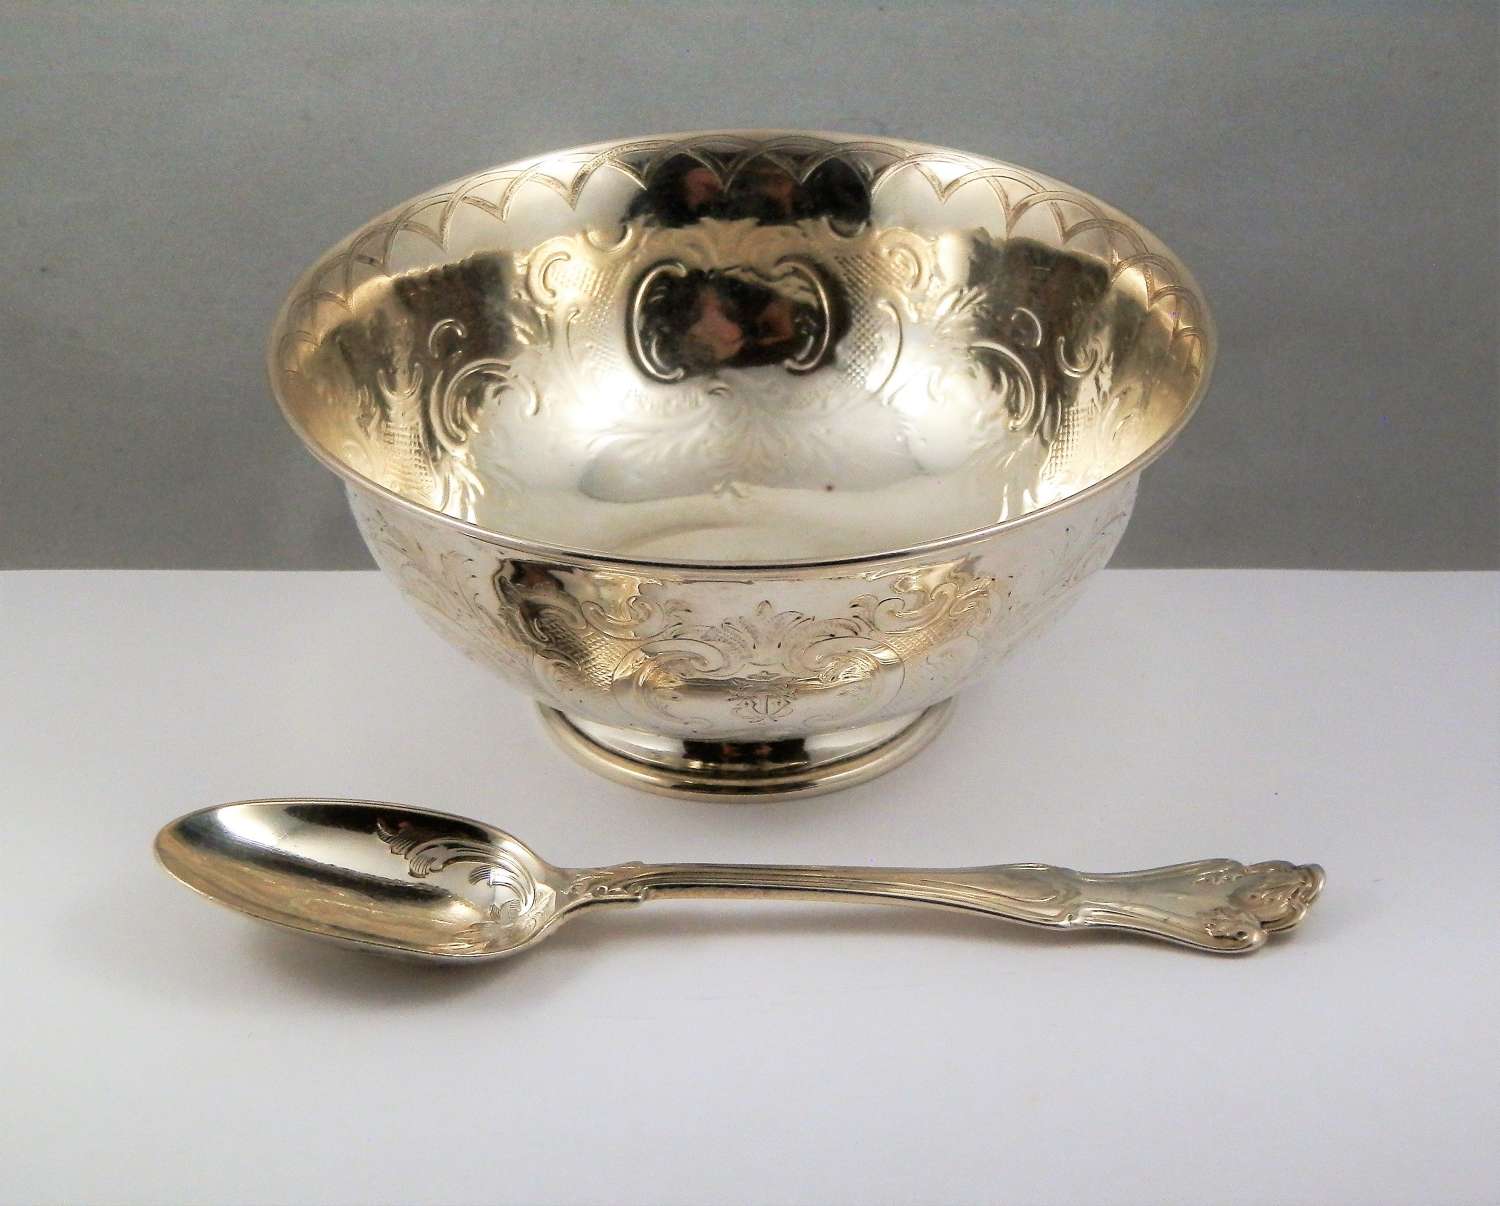 Victorian cased silver bowl and spoon, London 1852